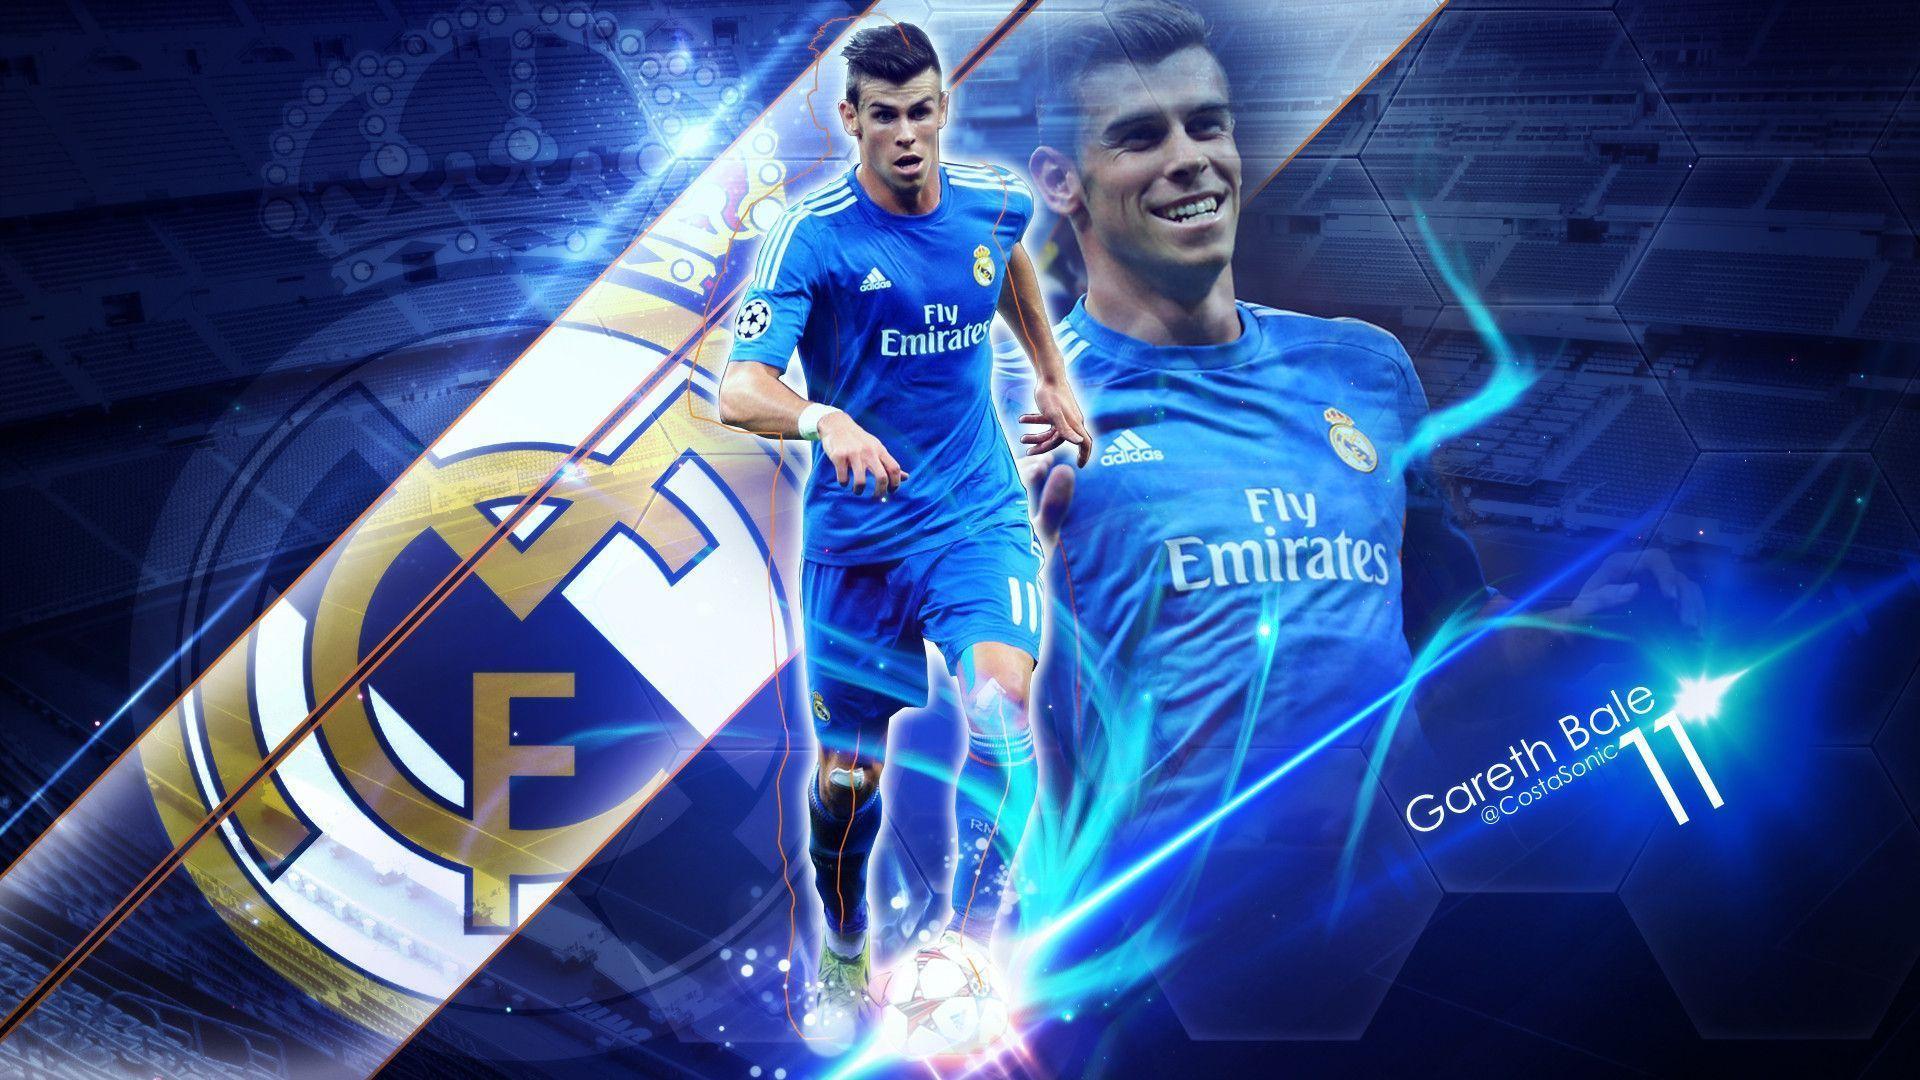 Exclusive Gareth Bale Real Madrid Wide Wallpaper, Background